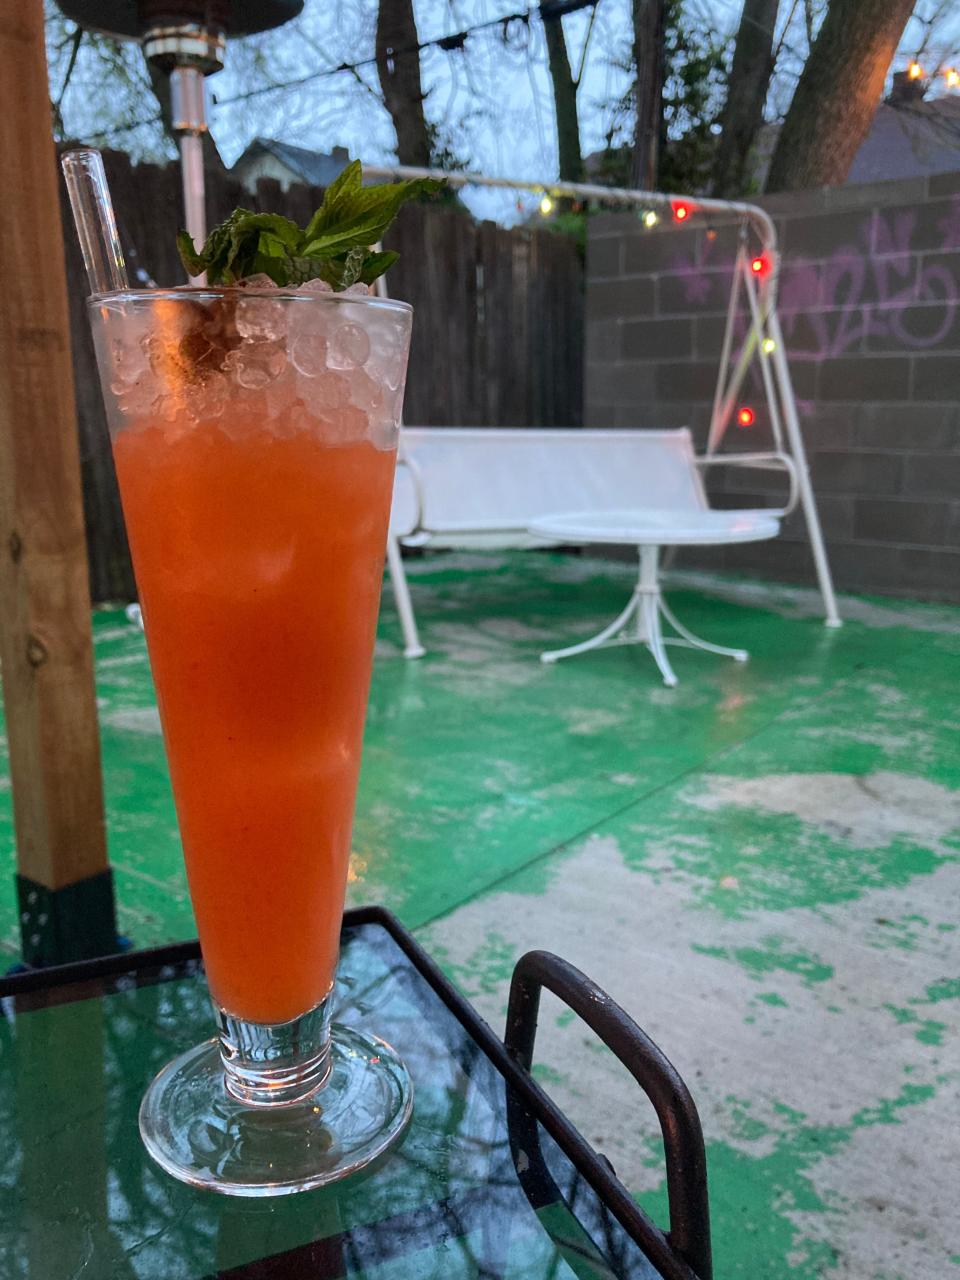 The Karate Kick cocktail served on the patio at The Bartender's Handshake